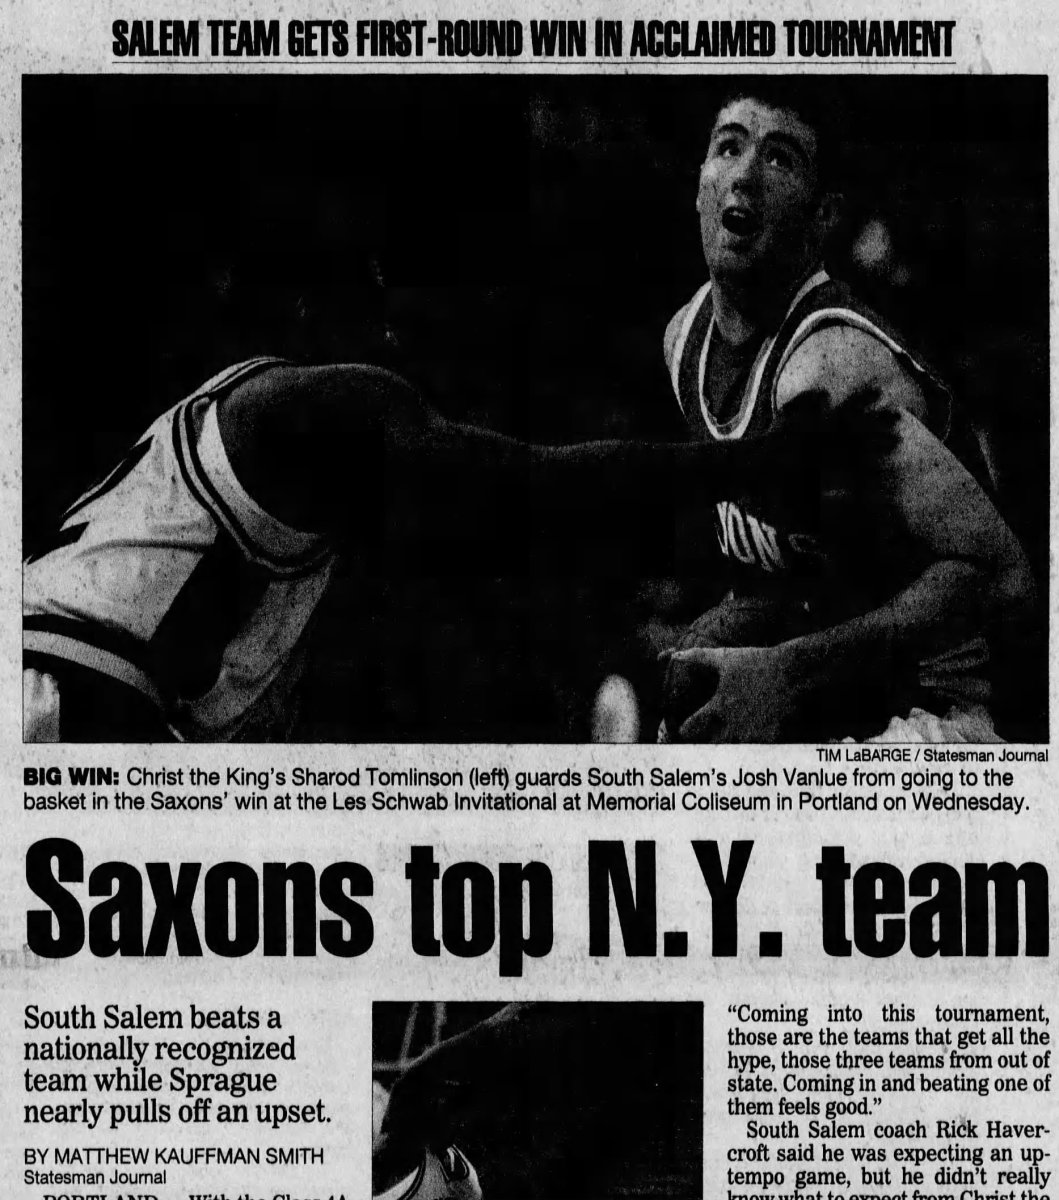 The Salem Statesman Journal sports front in December 2000 featured a centerpiece story on a South Salem upset of a national power in the Les Schwab Invitational.